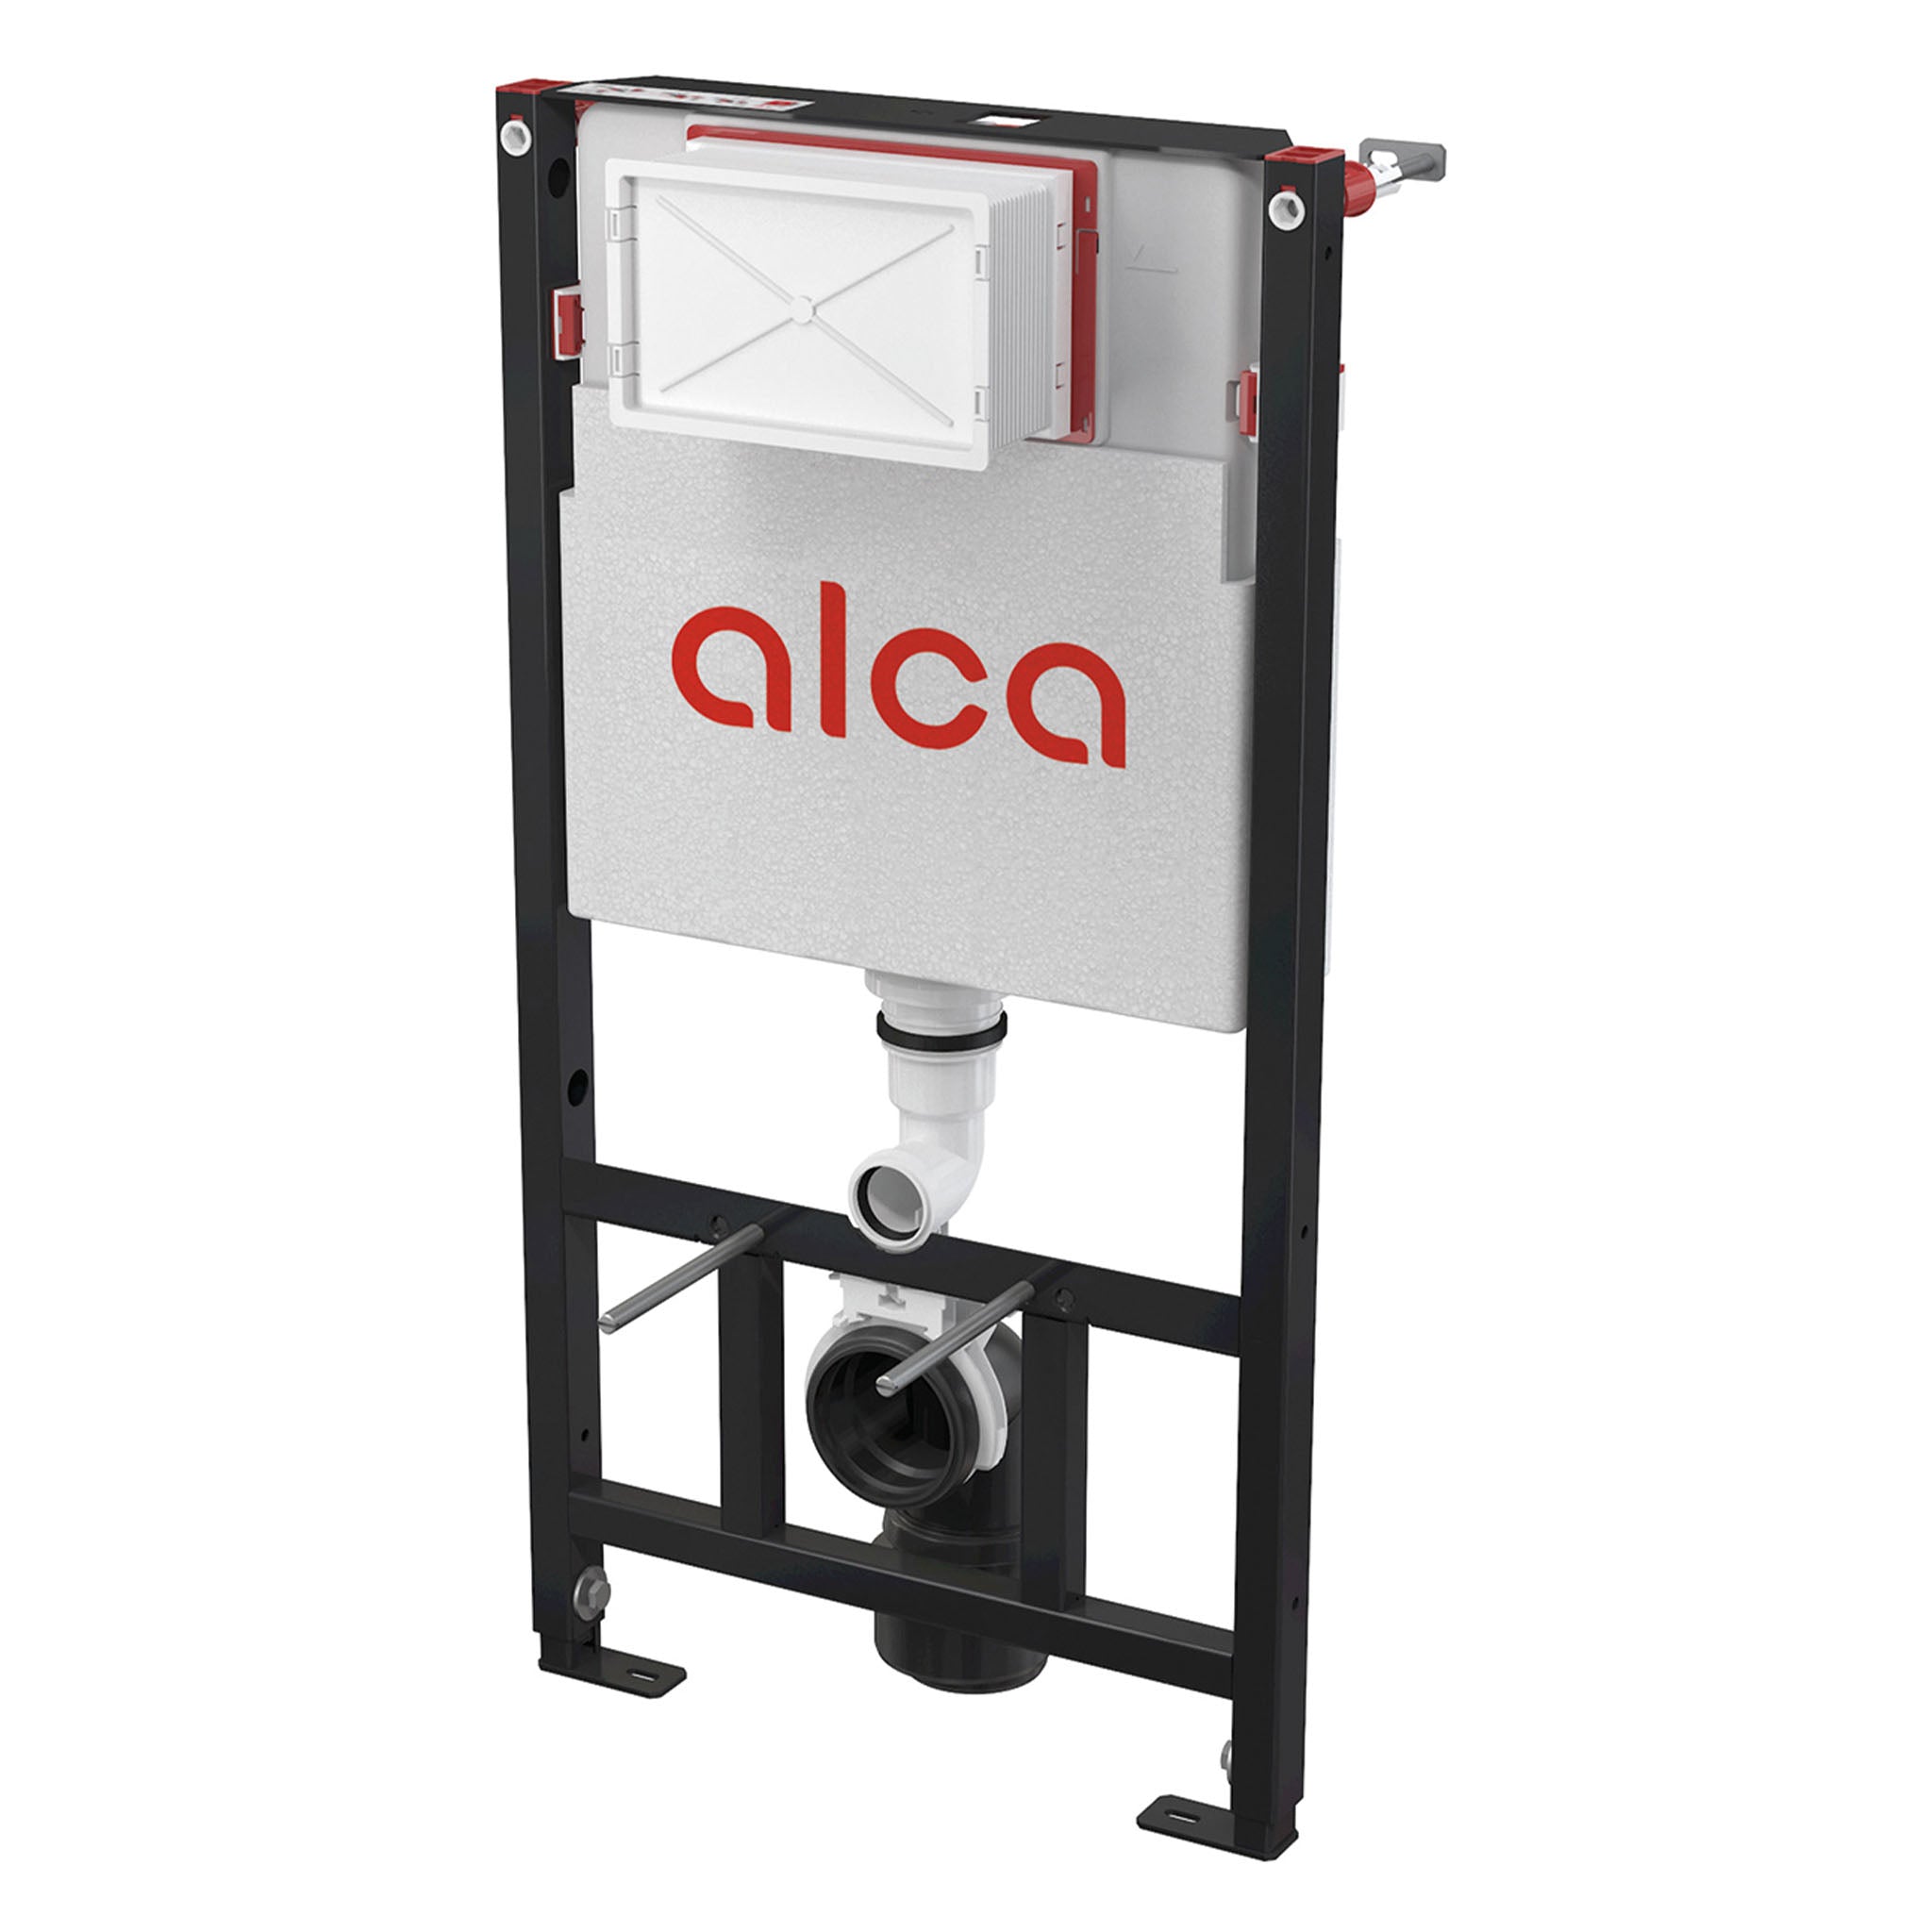 MyLife Alca 1000mm Wall Mounted Toilet Frame & Concealed Cistern